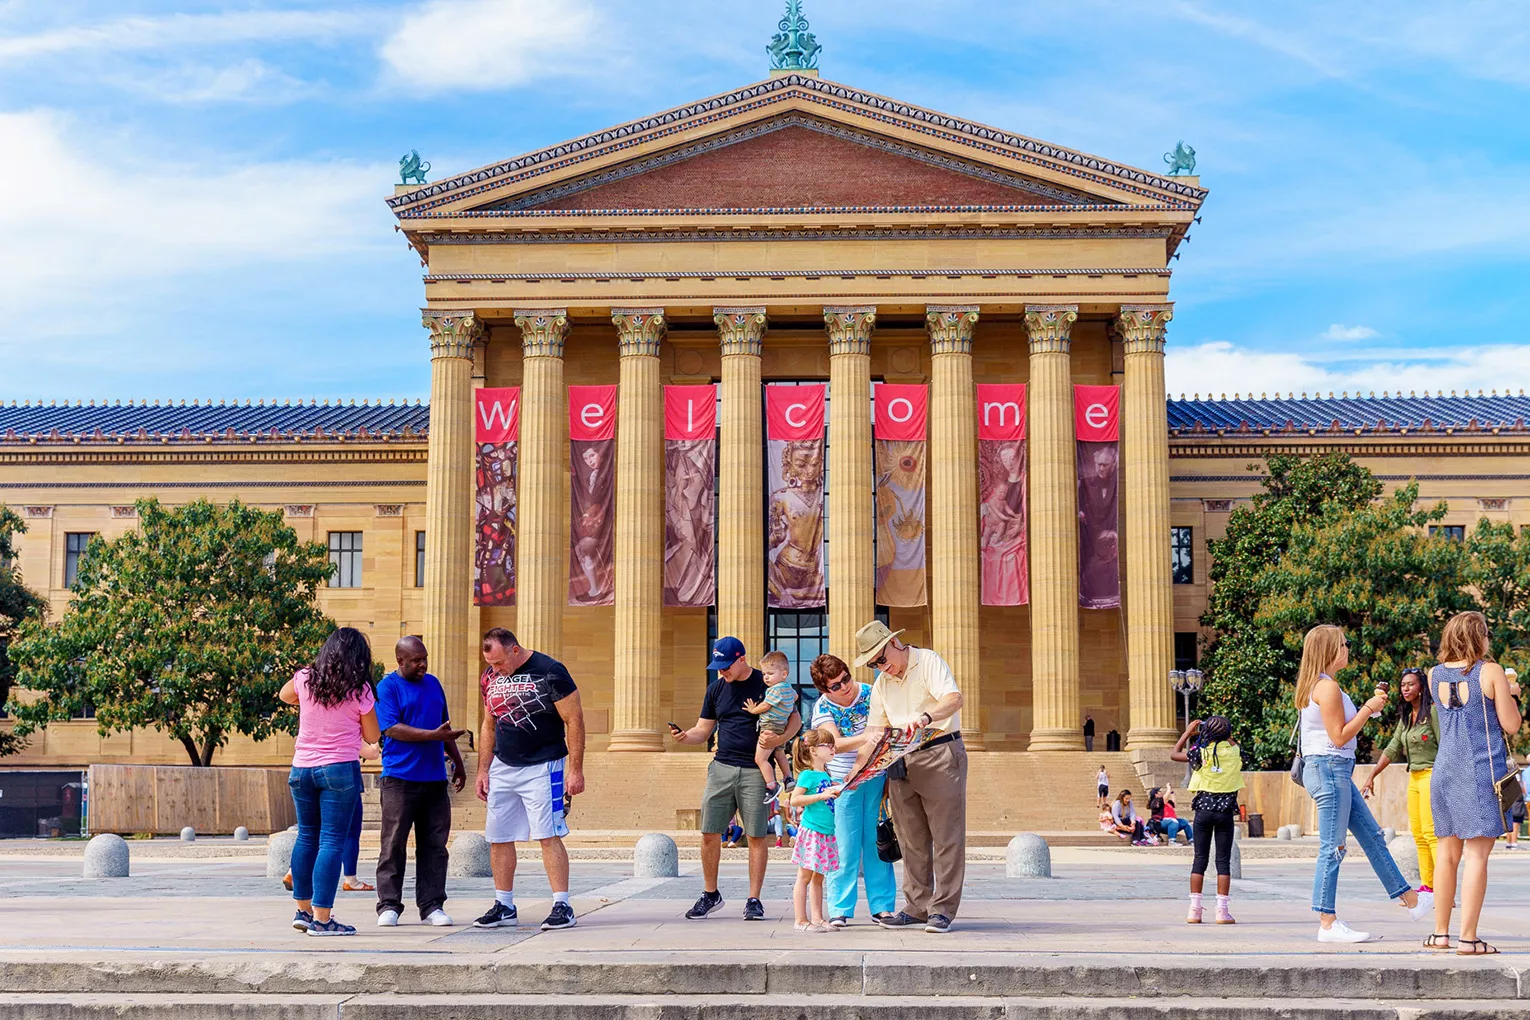 Philly Art museum from Visit Philly